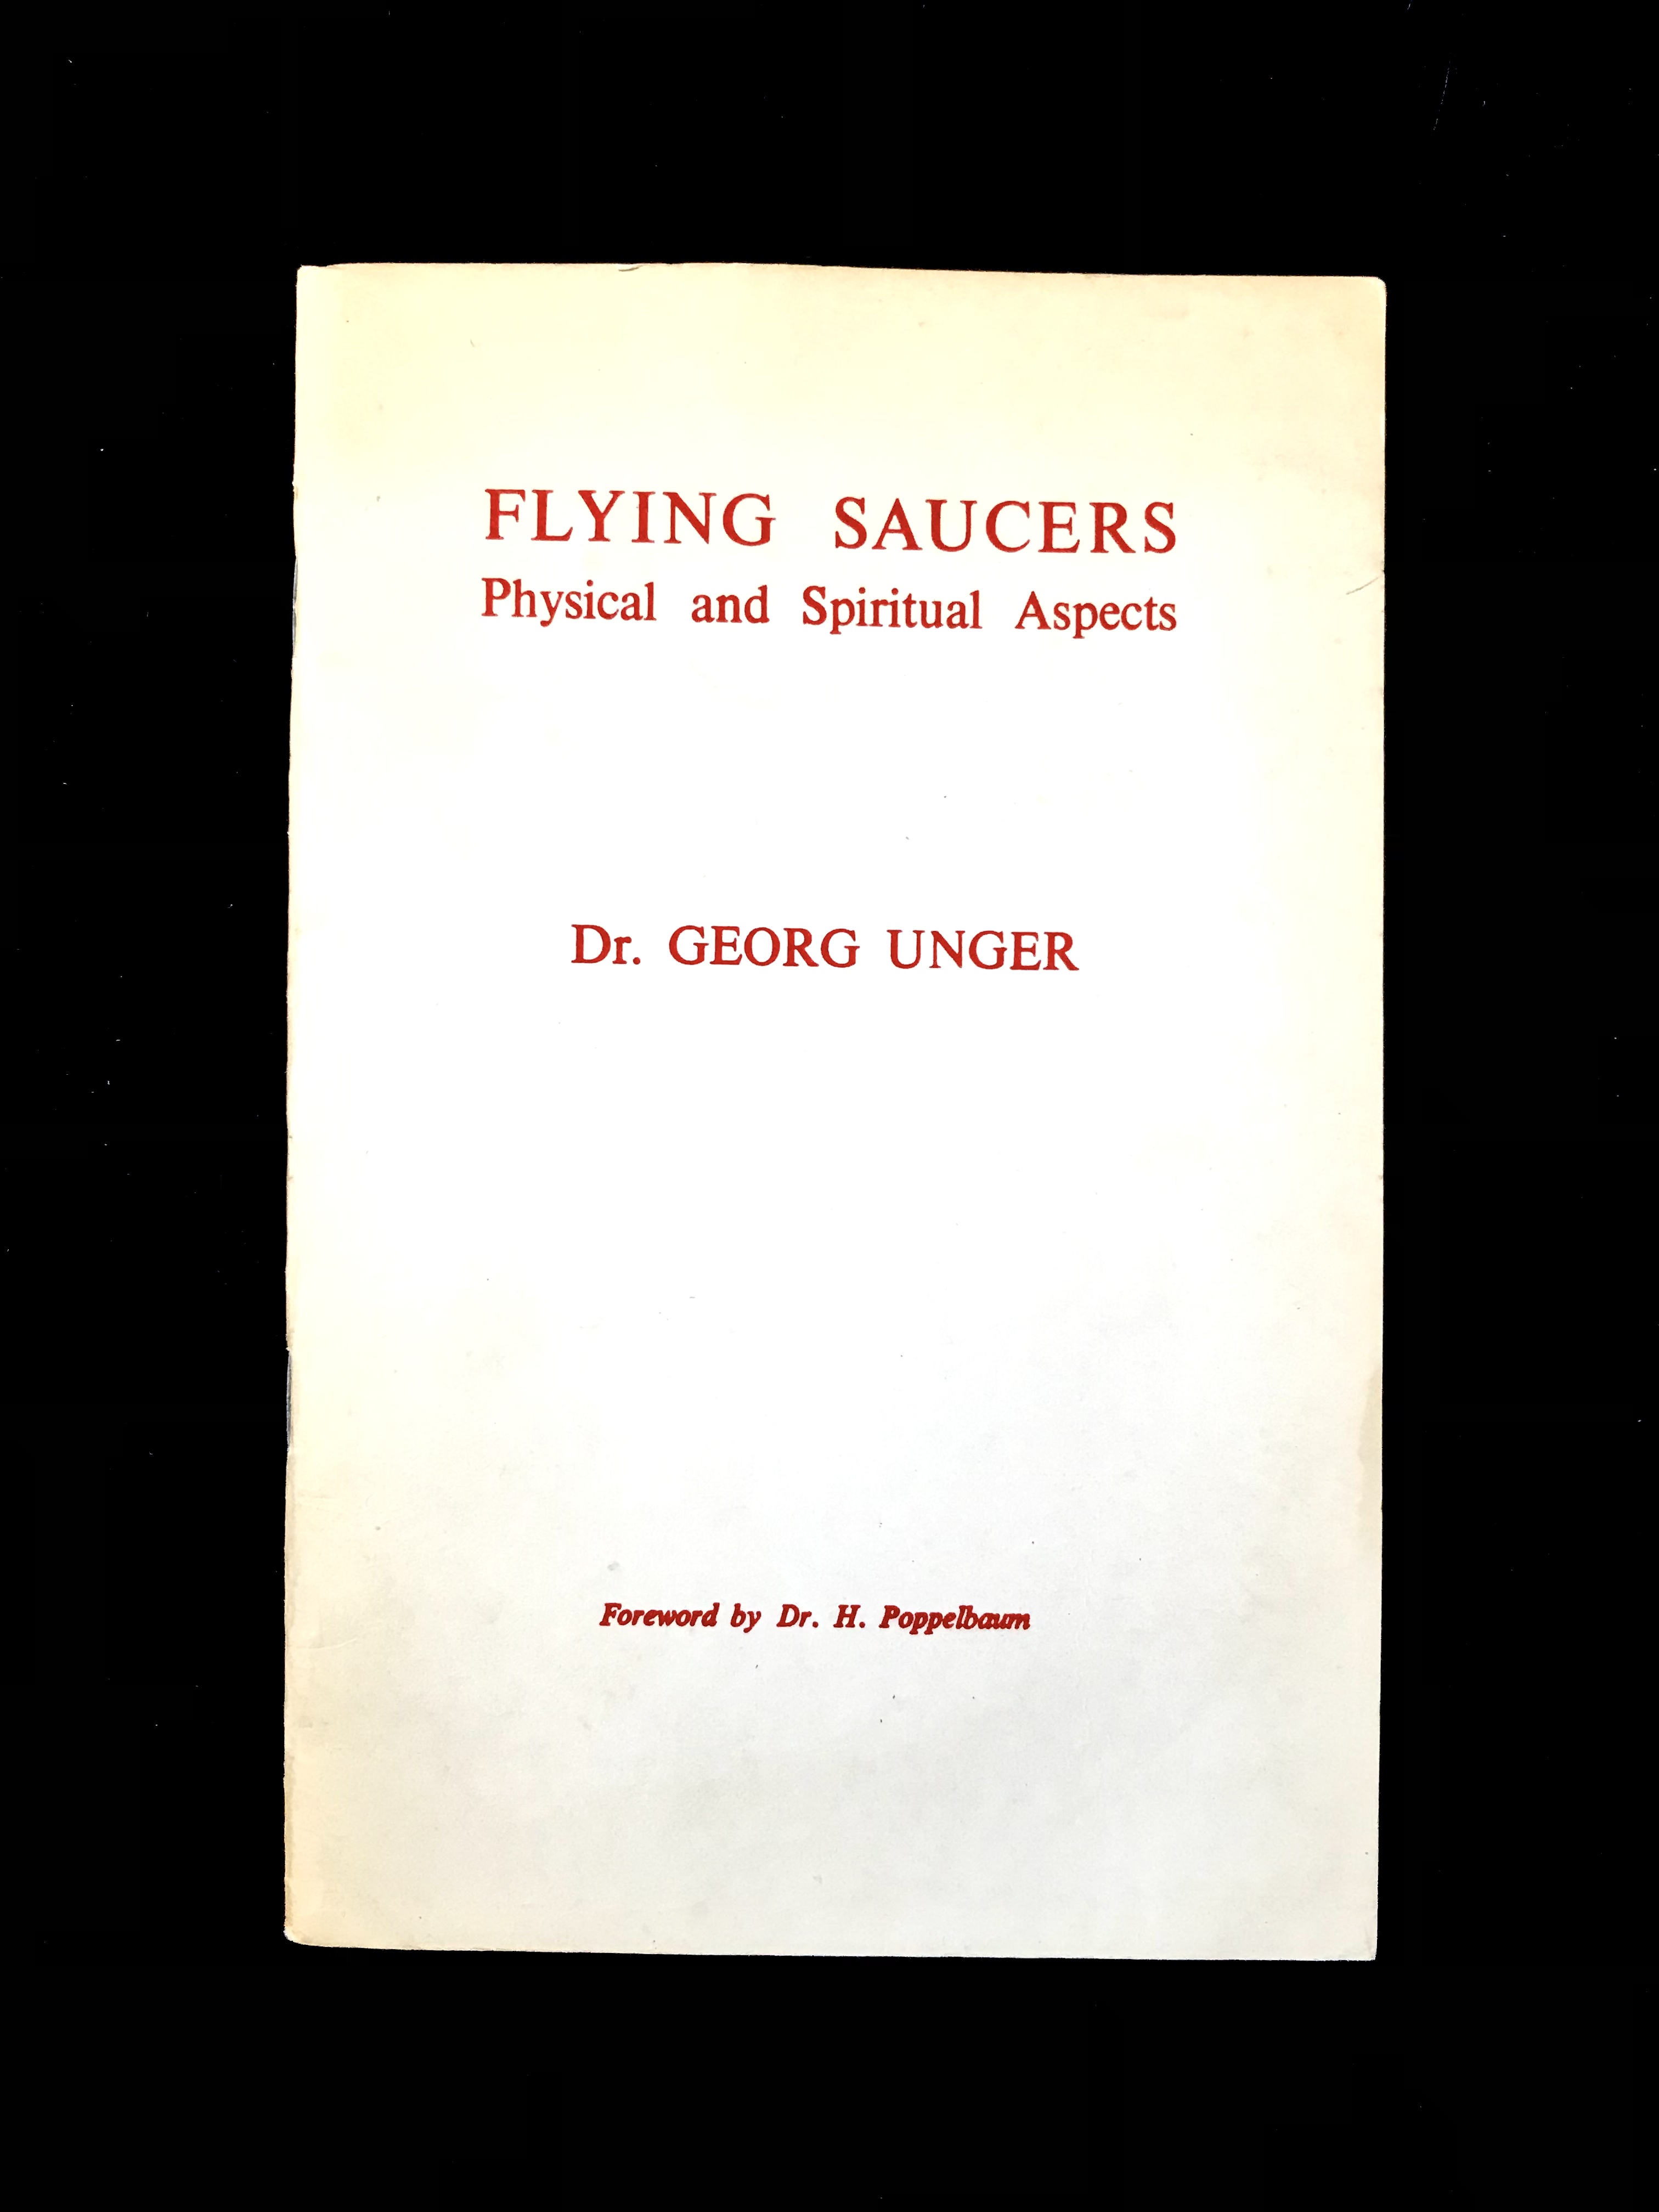 Flying Saucers: Physical and Spiritual Aspects by Dr. Georg Unger